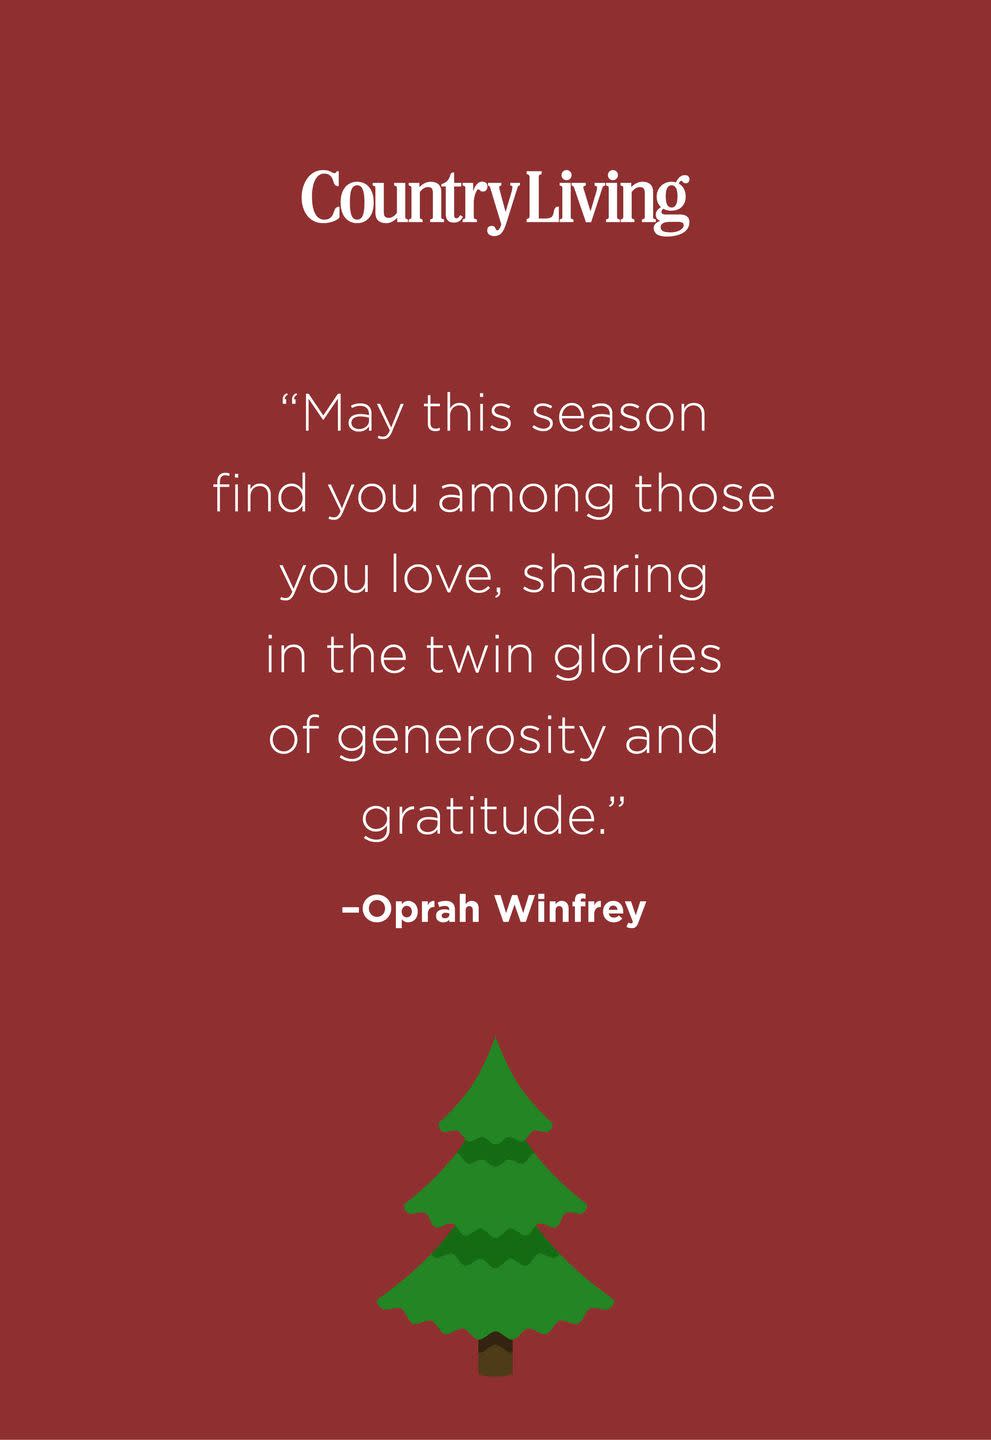 Download Merry Christmas Wishes And Messages To Send To Friends All Season Long